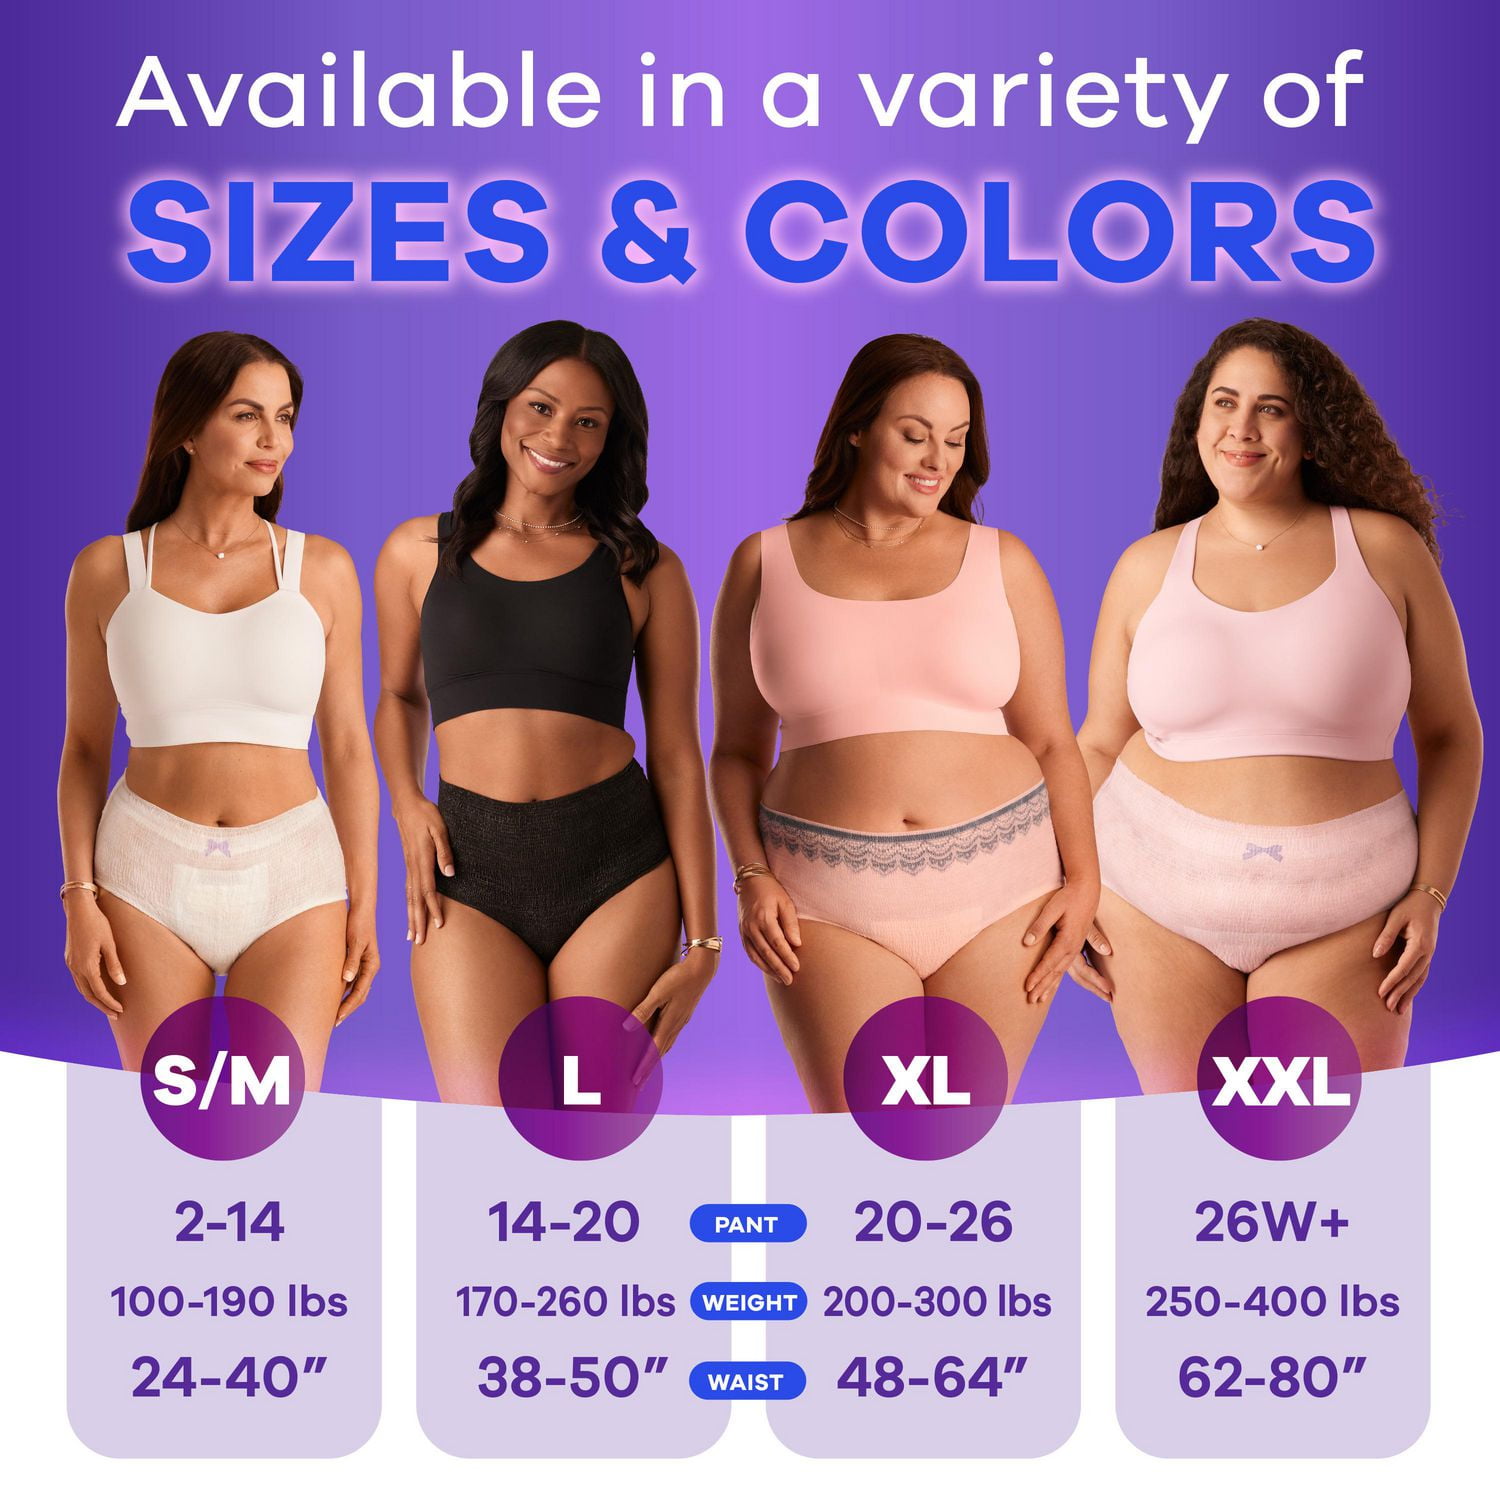 theblackpurple: In 2 weeks, I lost one full size in my pants